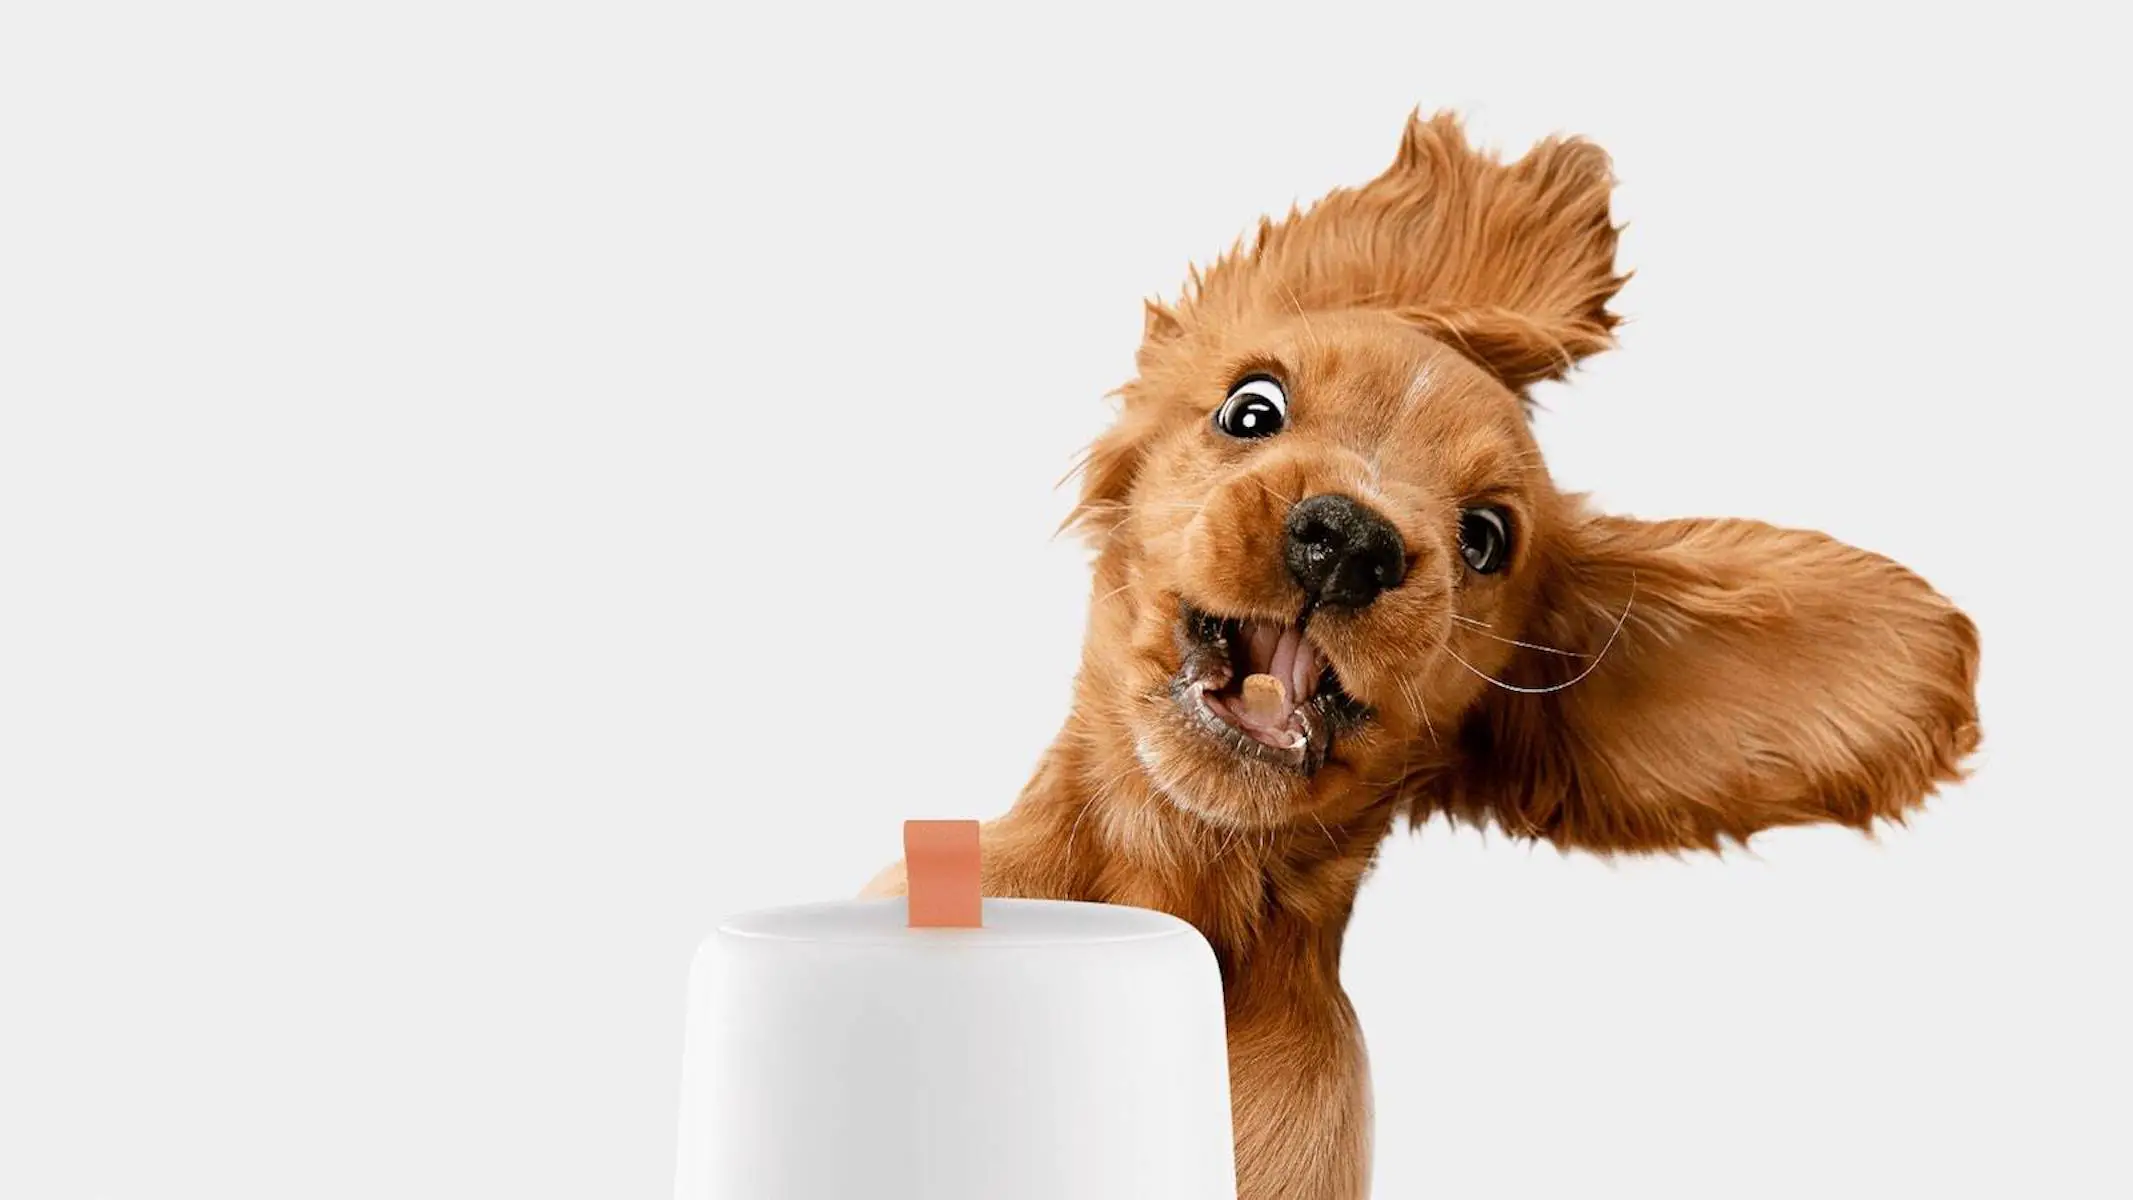 The best pet gadgets and accessories to buy for your furry friends in 2022